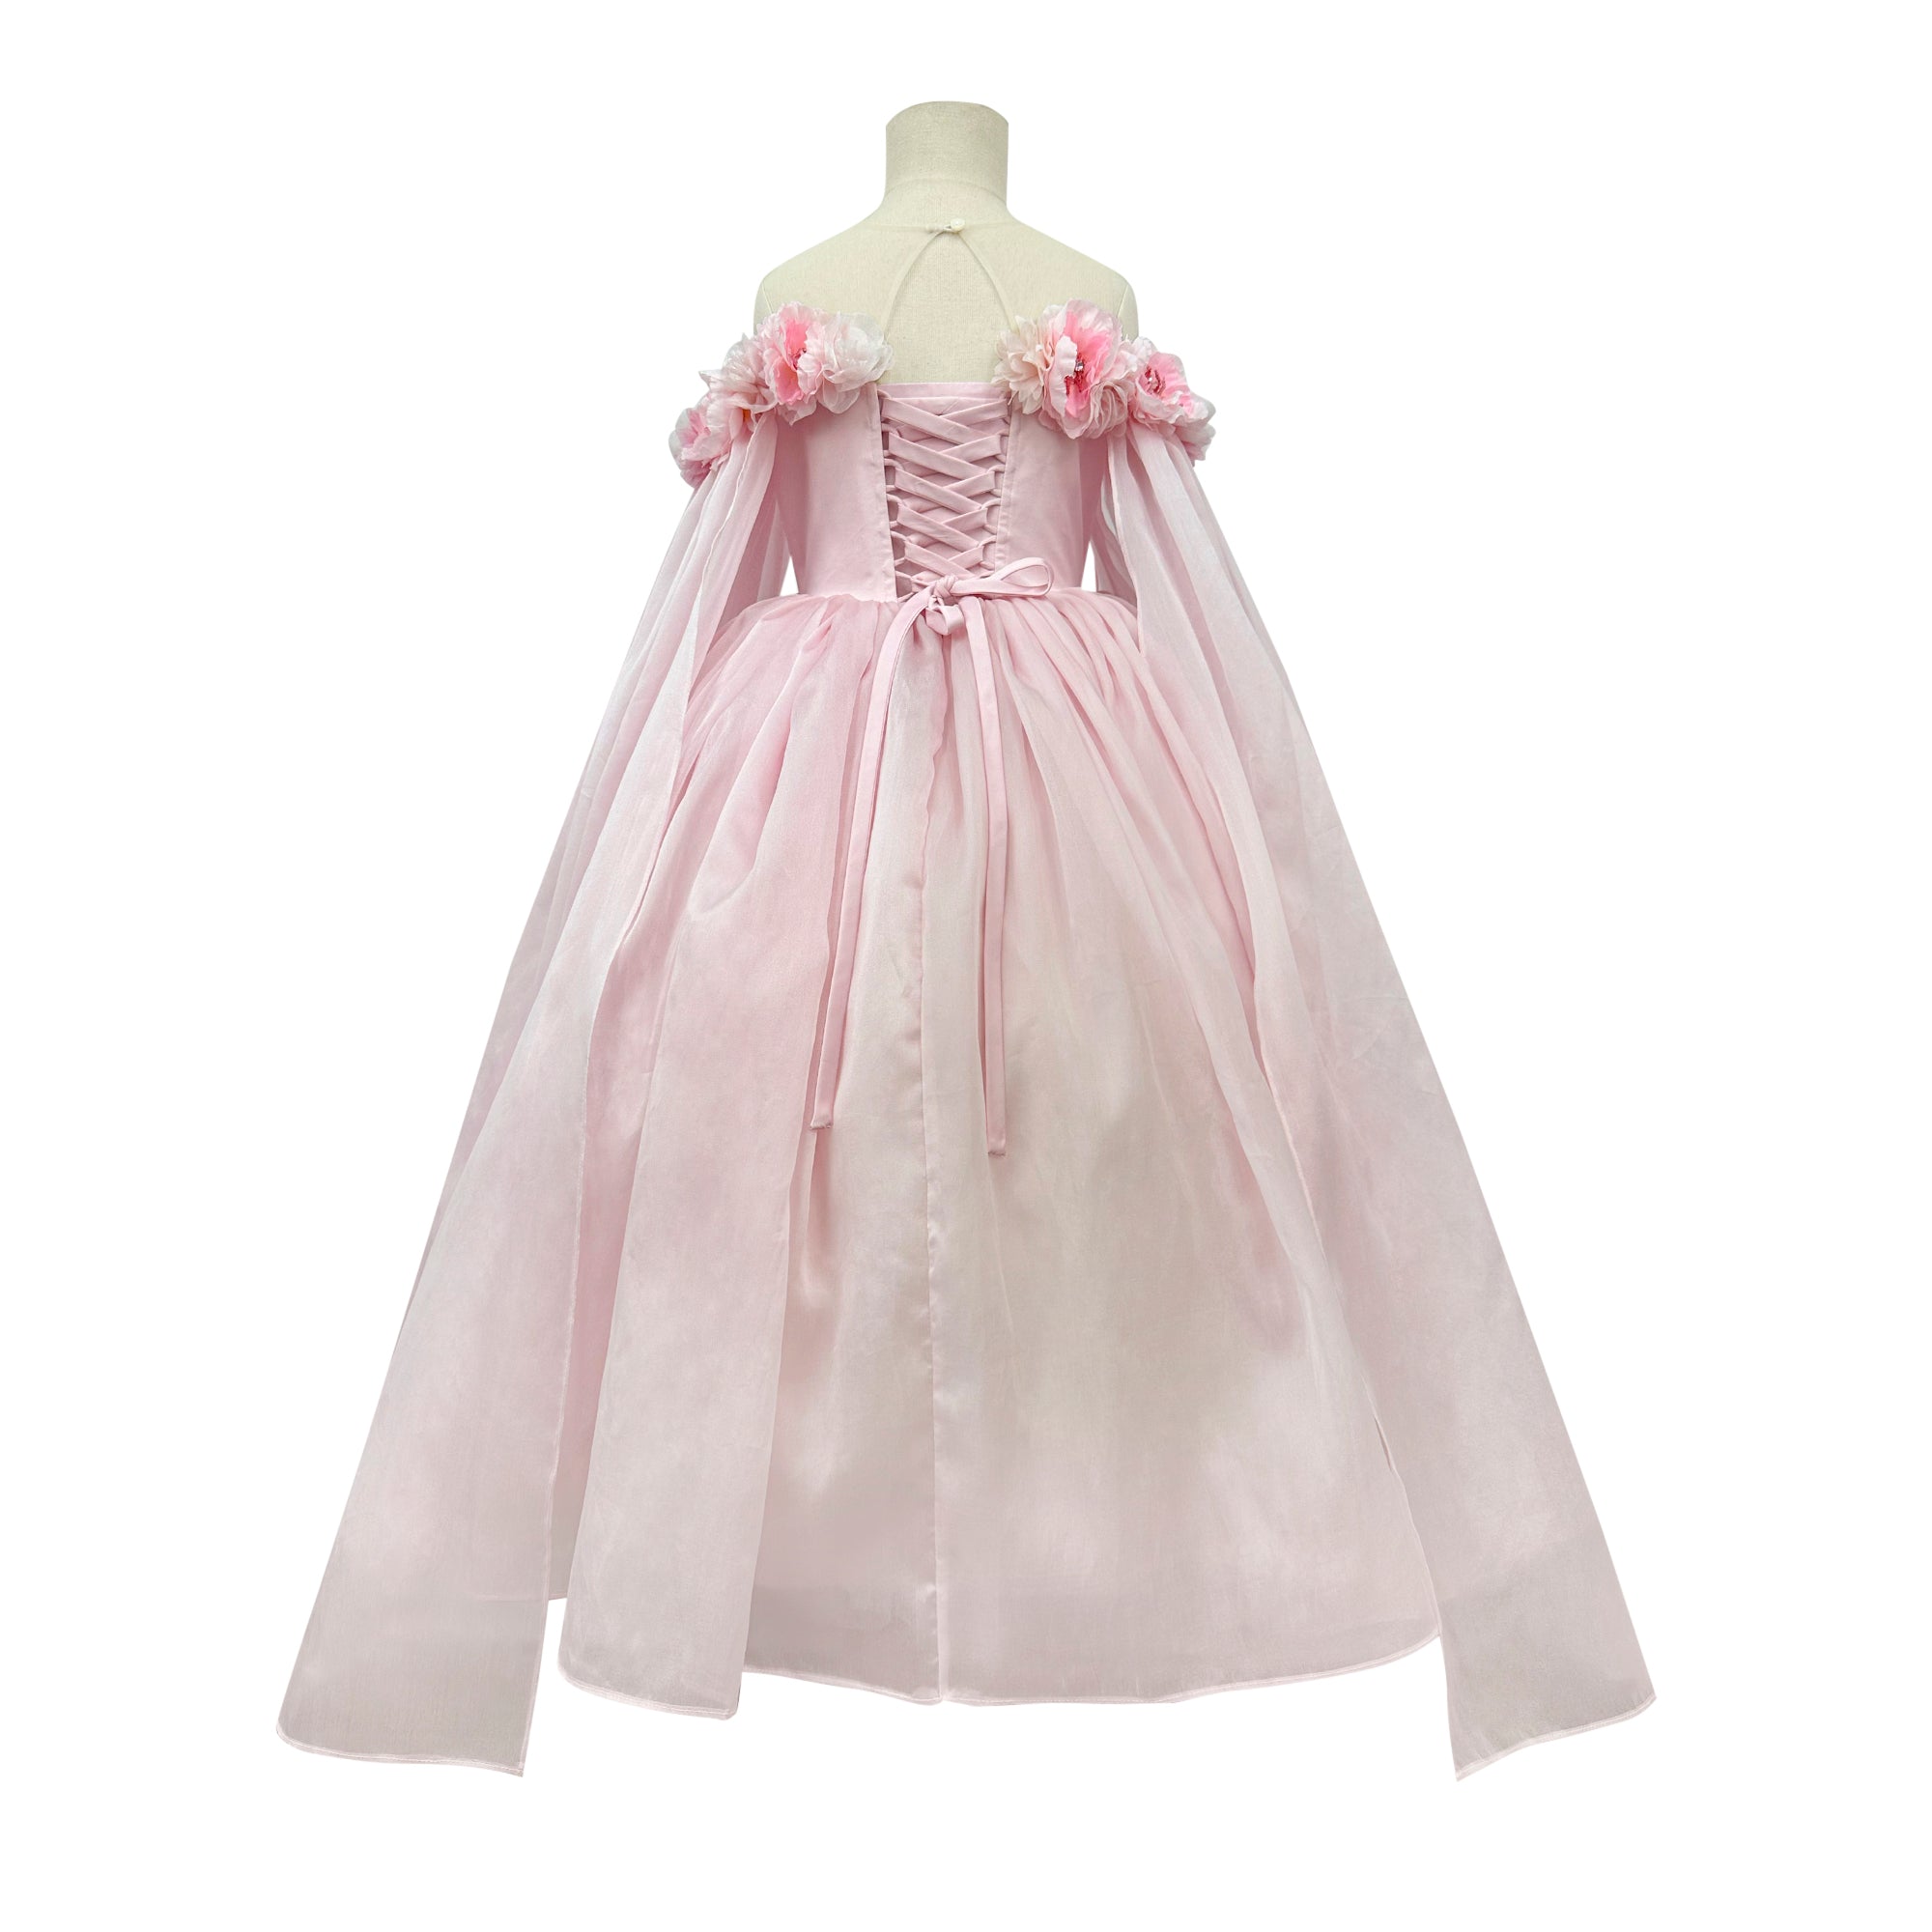 The Floral Organza Gown